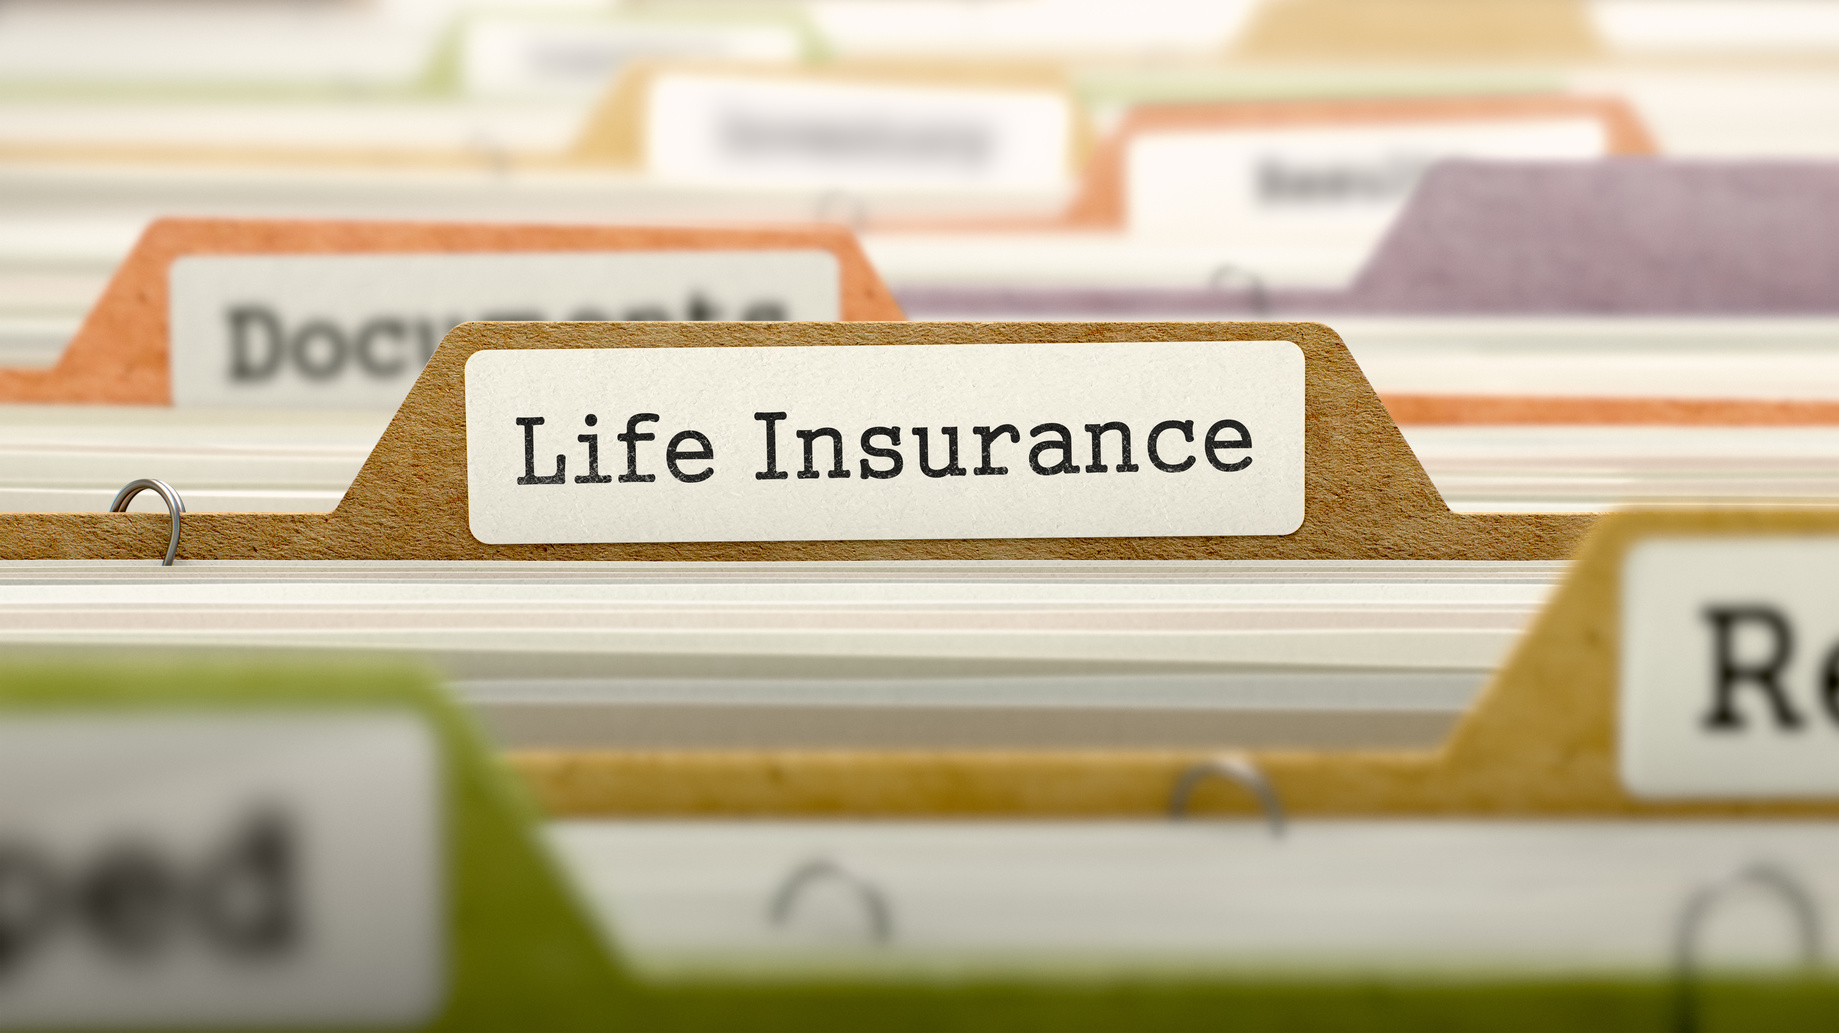 5 Times You'll Want to Review Your Life Insurance - ArticleCity.com